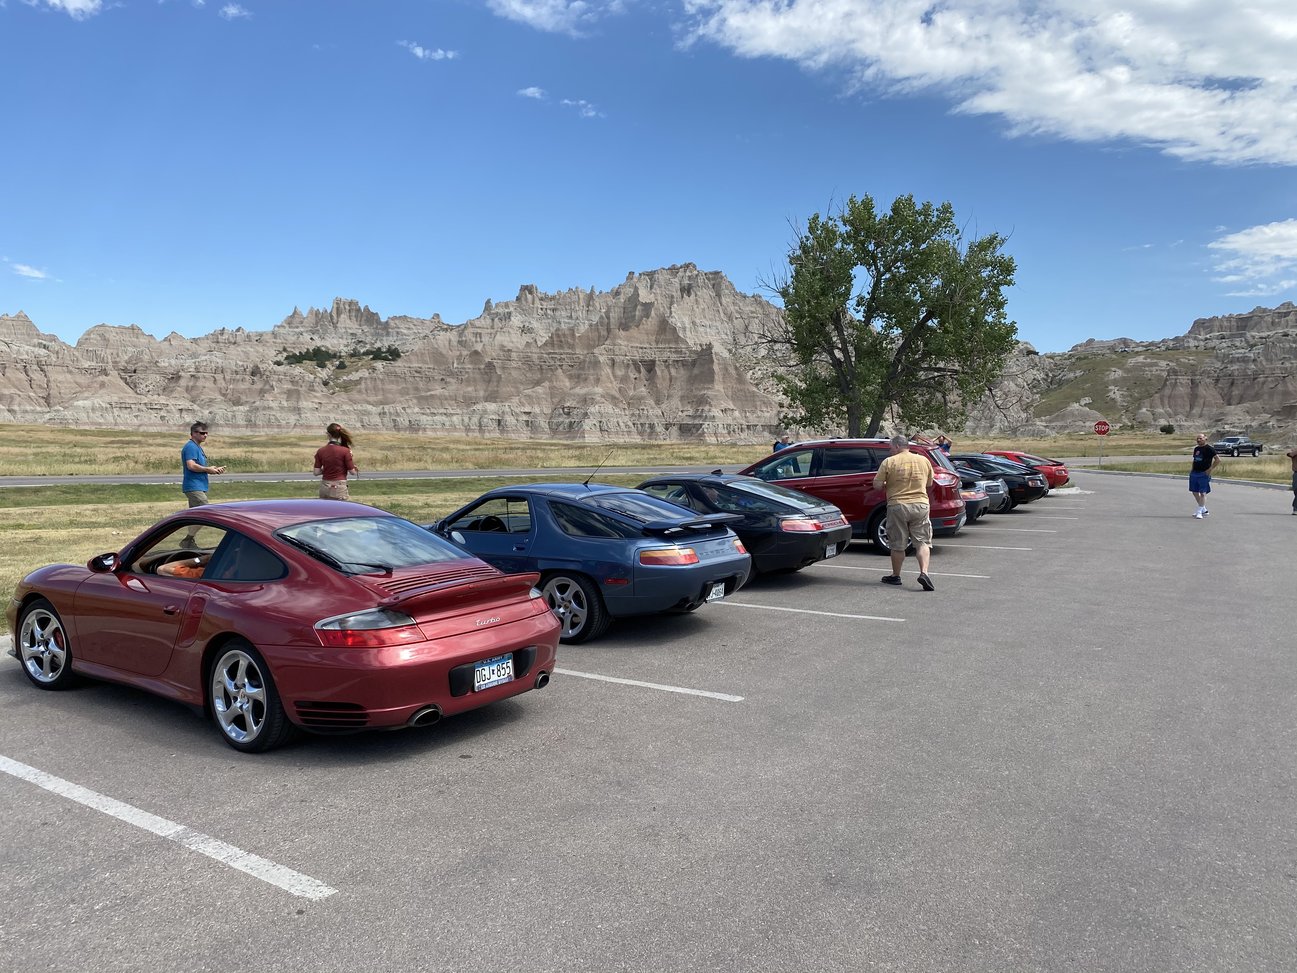 sharks in the badlands 928s event cars in the parking lot 